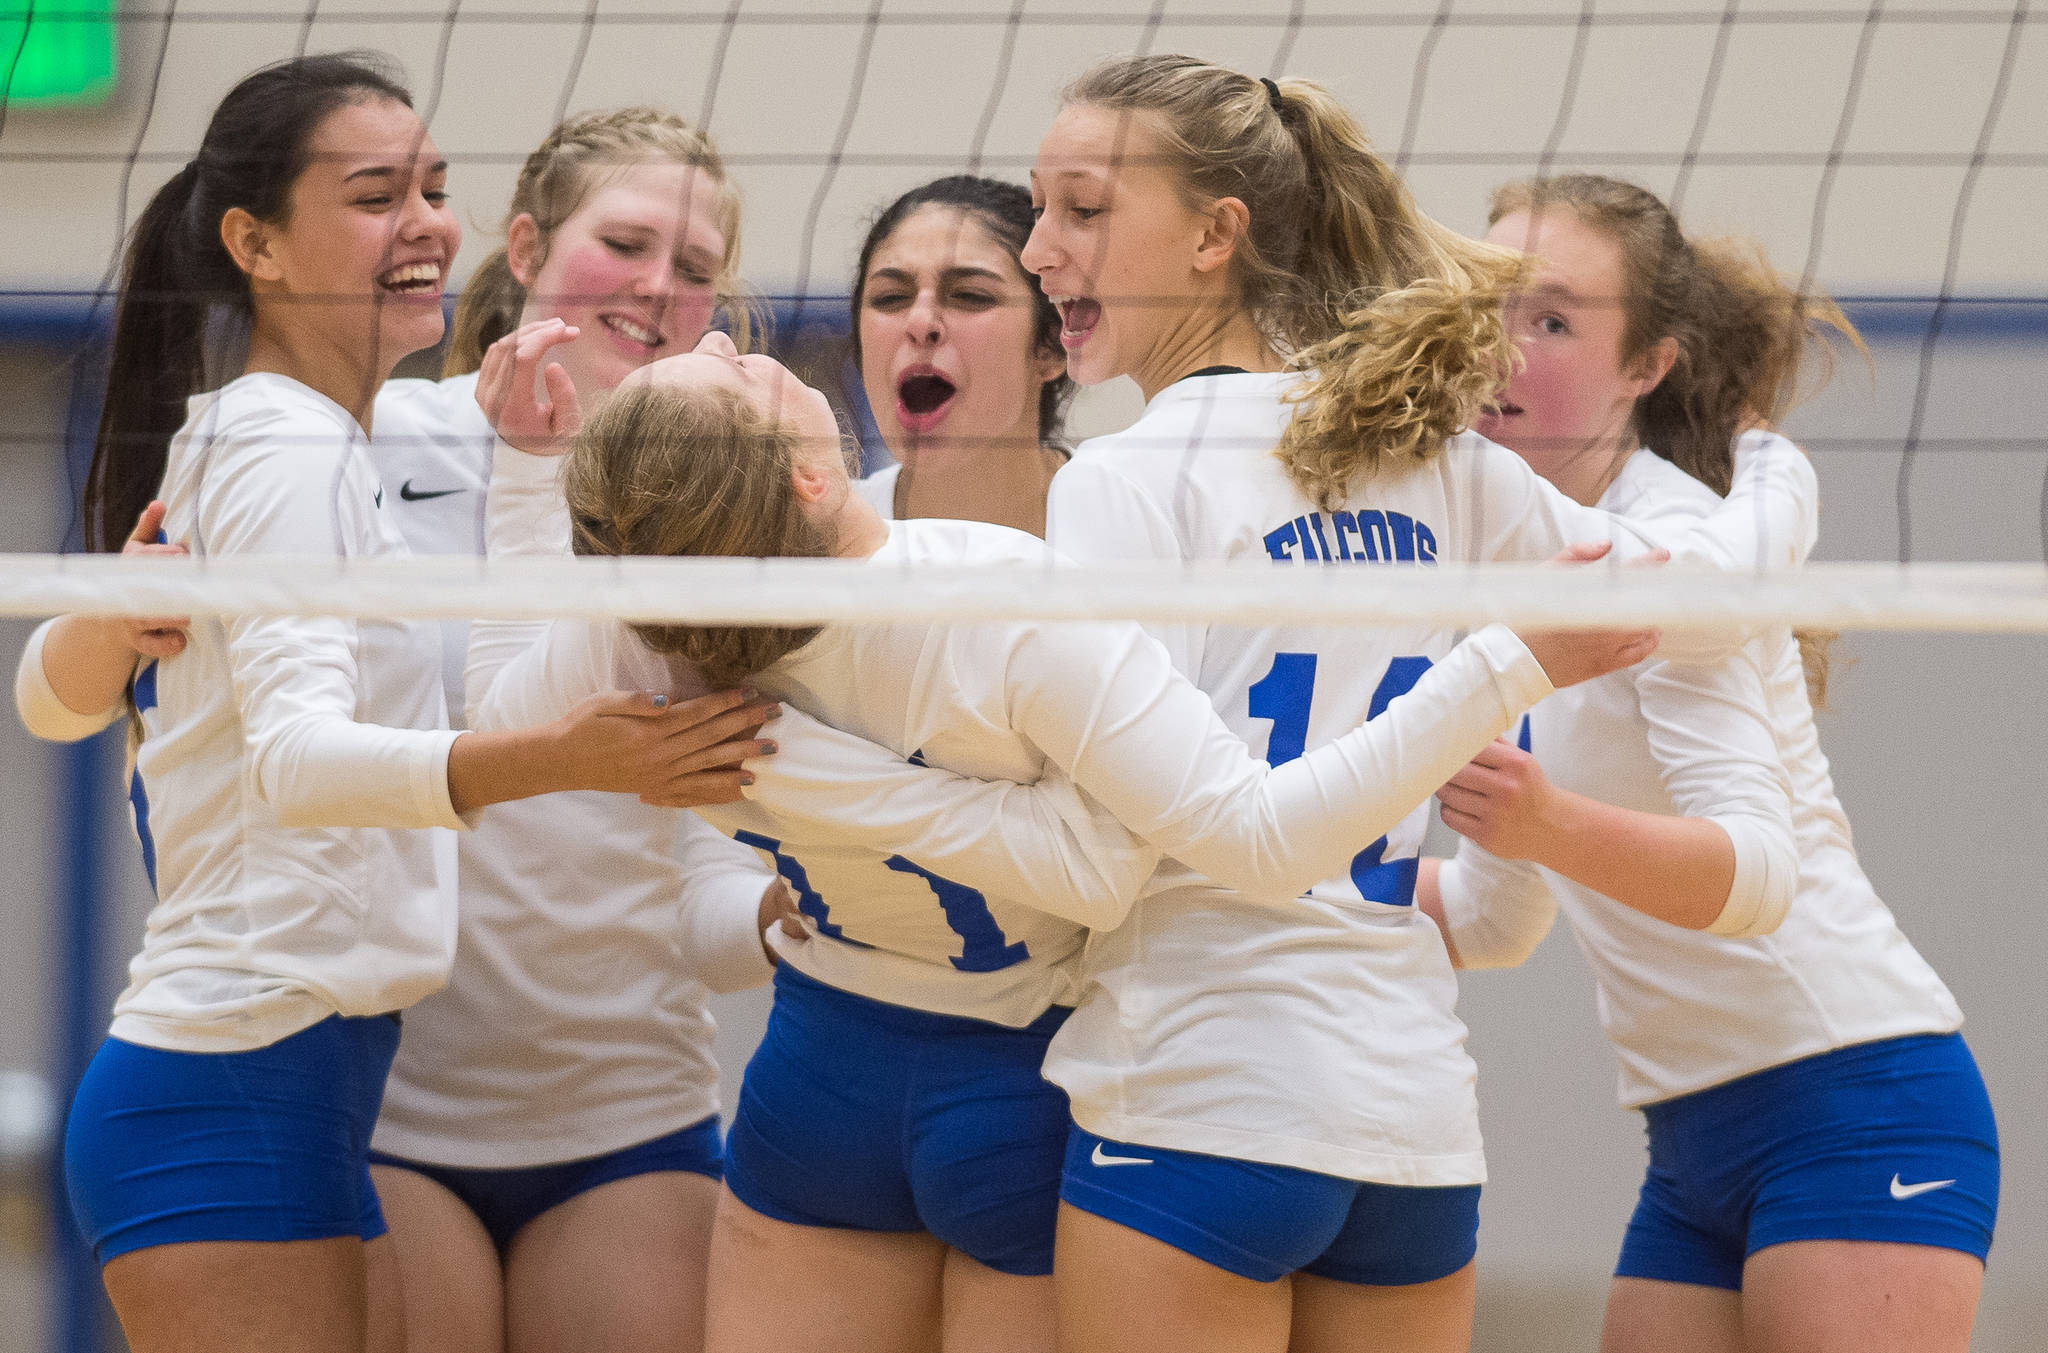 Thunder Mountain’s Audrey Welling celebrates a kill shot with her teammates during their match against Sitka on Friday at Thunder Mountain High School on Friday, Sept. 15, 2017. (Michael Penn | Juneau Empire)